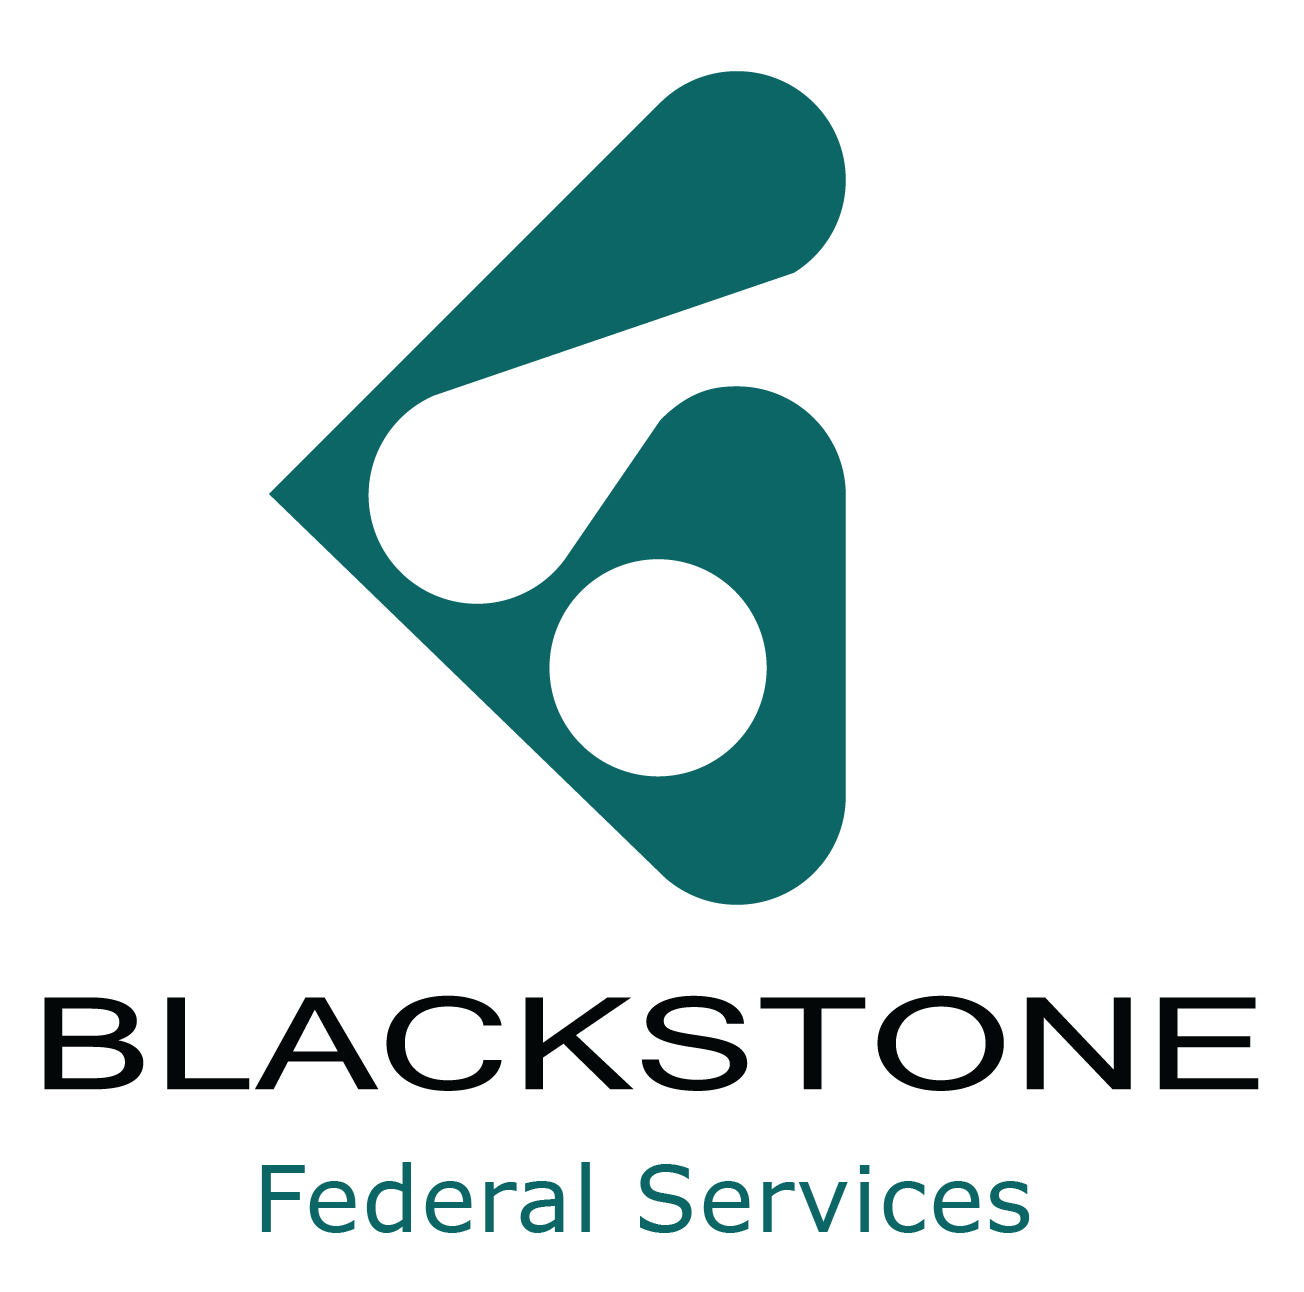 Blackstone Technology Group Enables Innovation for Non-Profits through ...